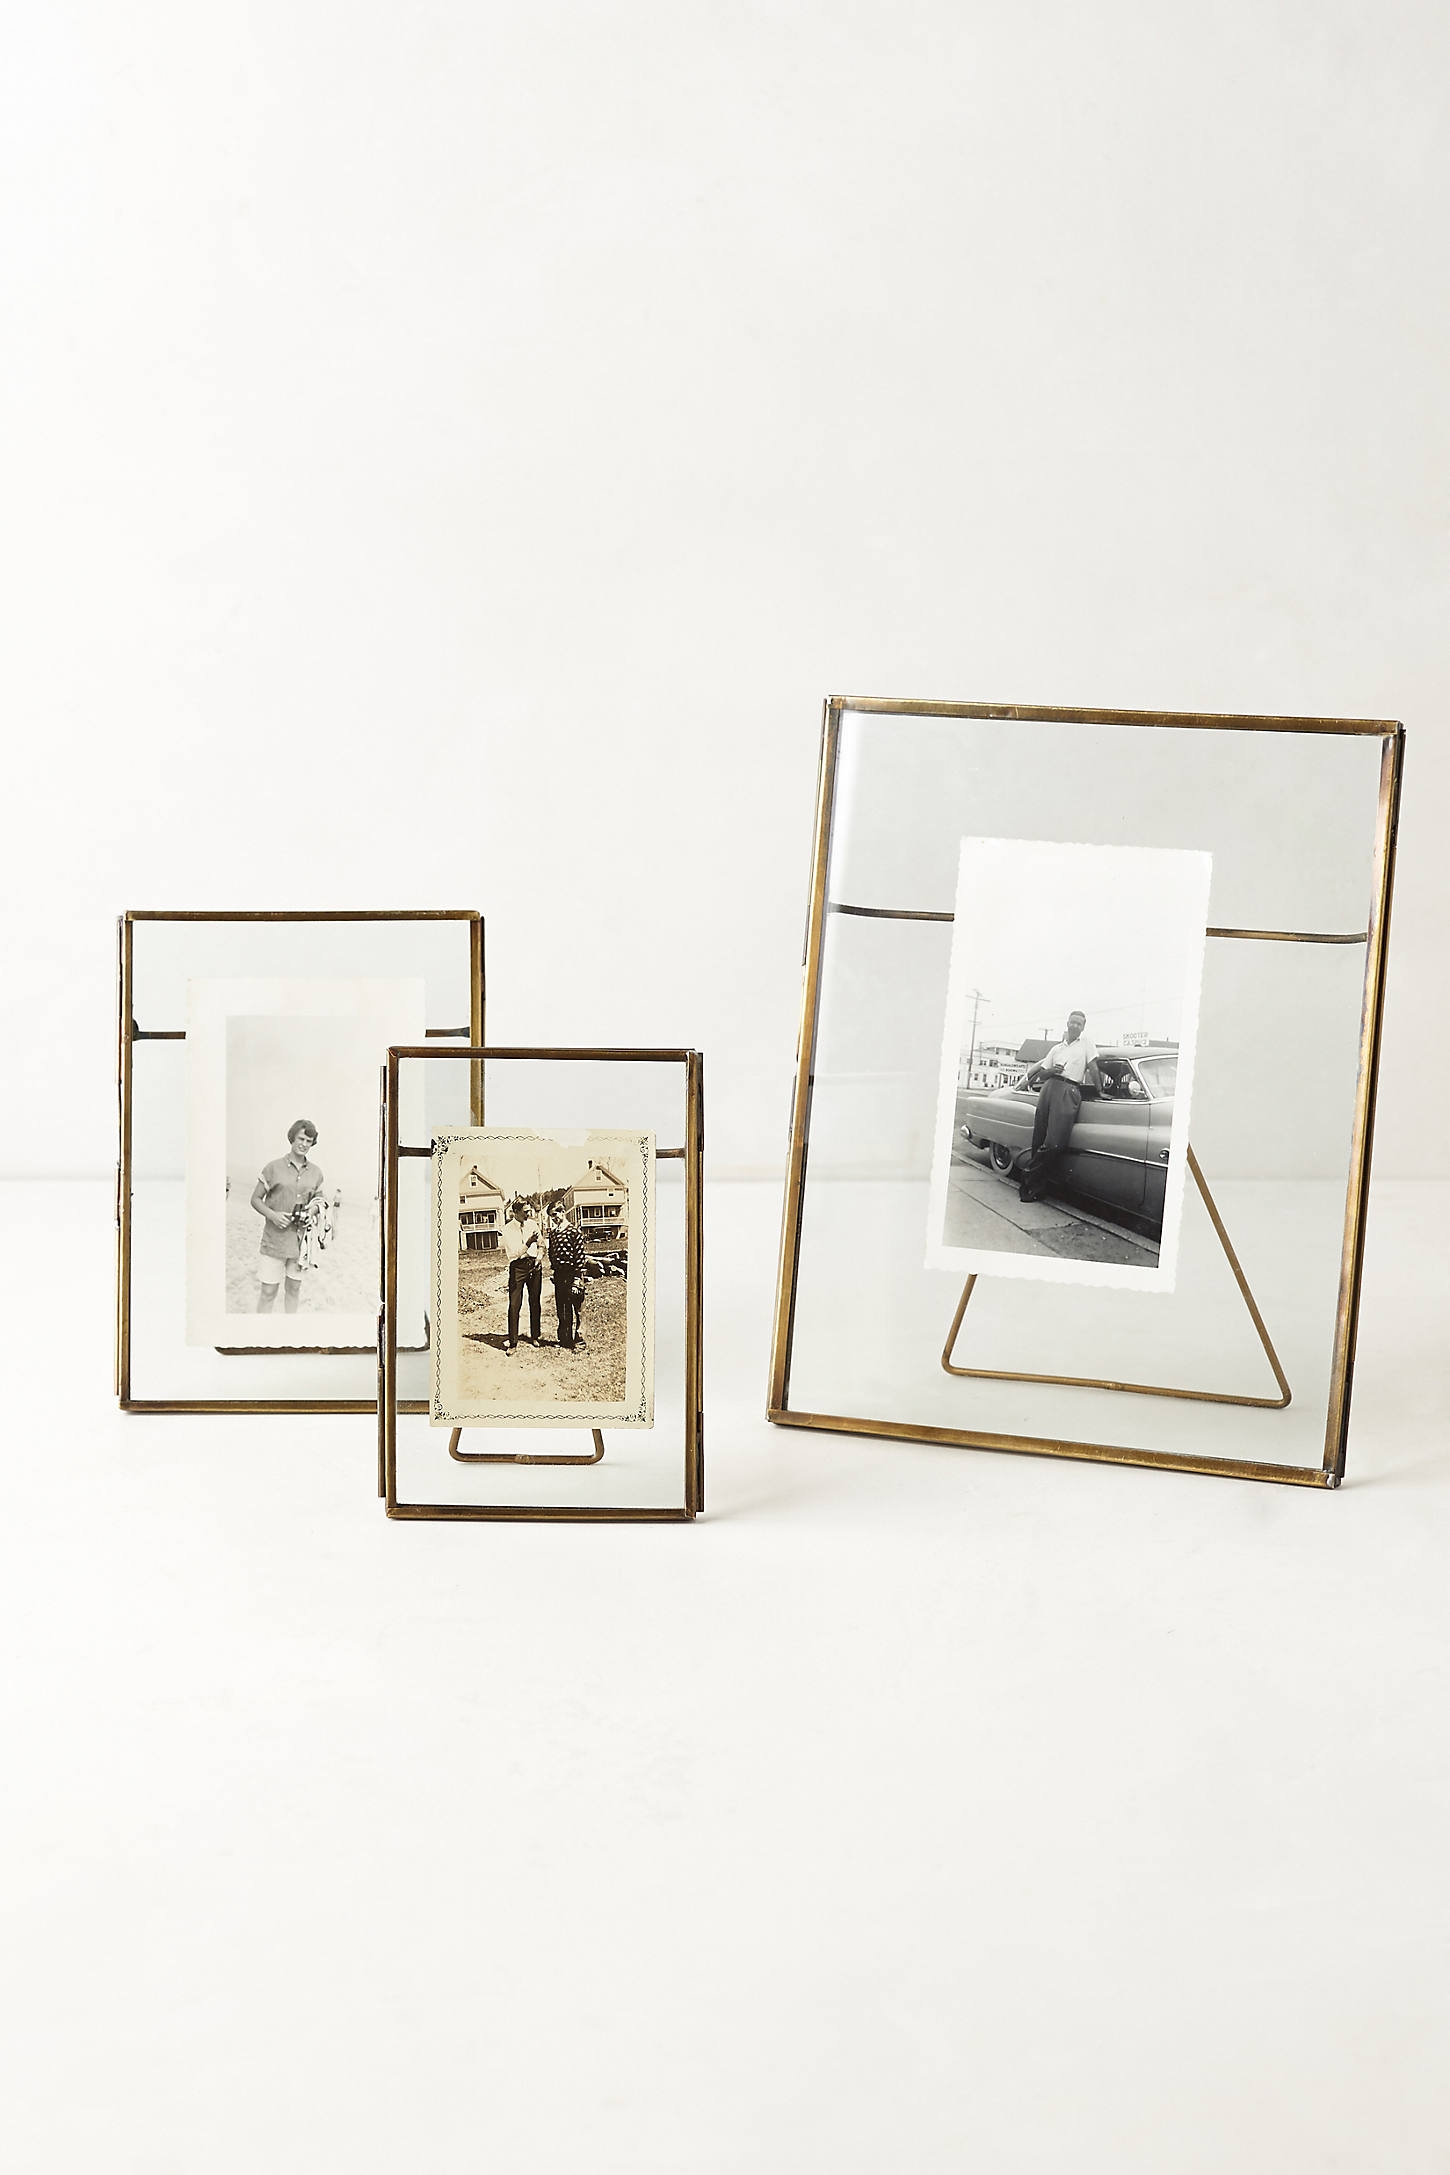 Pressed Glass Photo Frame By Anthropologie in Brown Size 5 X 7 - Image 0